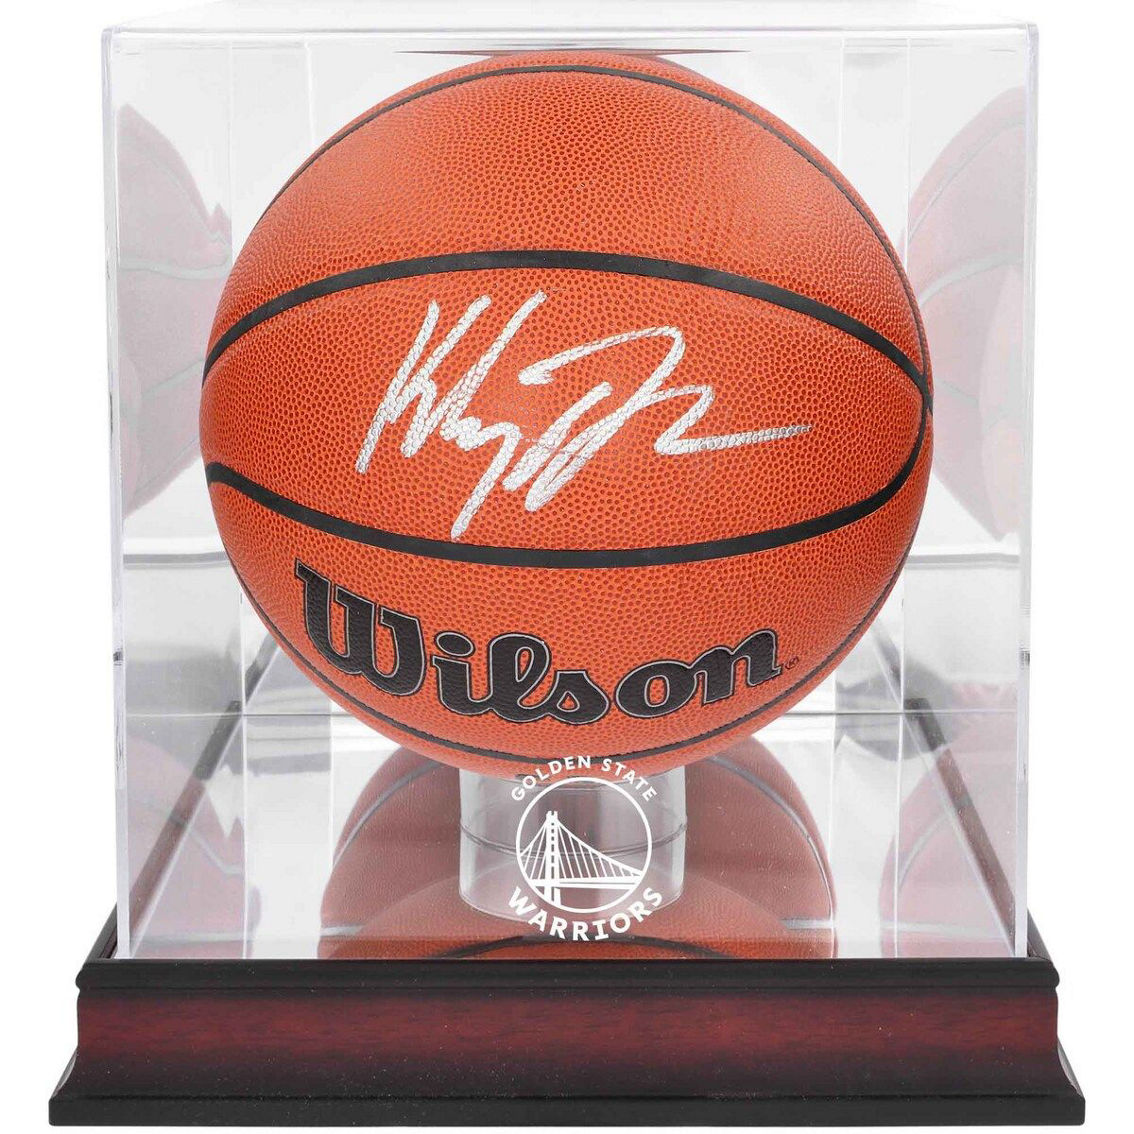 Fanatics Authentic Klay Thompson Golden State Warriors Autographed Wilson Replica Basketball with Mahogany Team Logo Display Case - Image 2 of 2